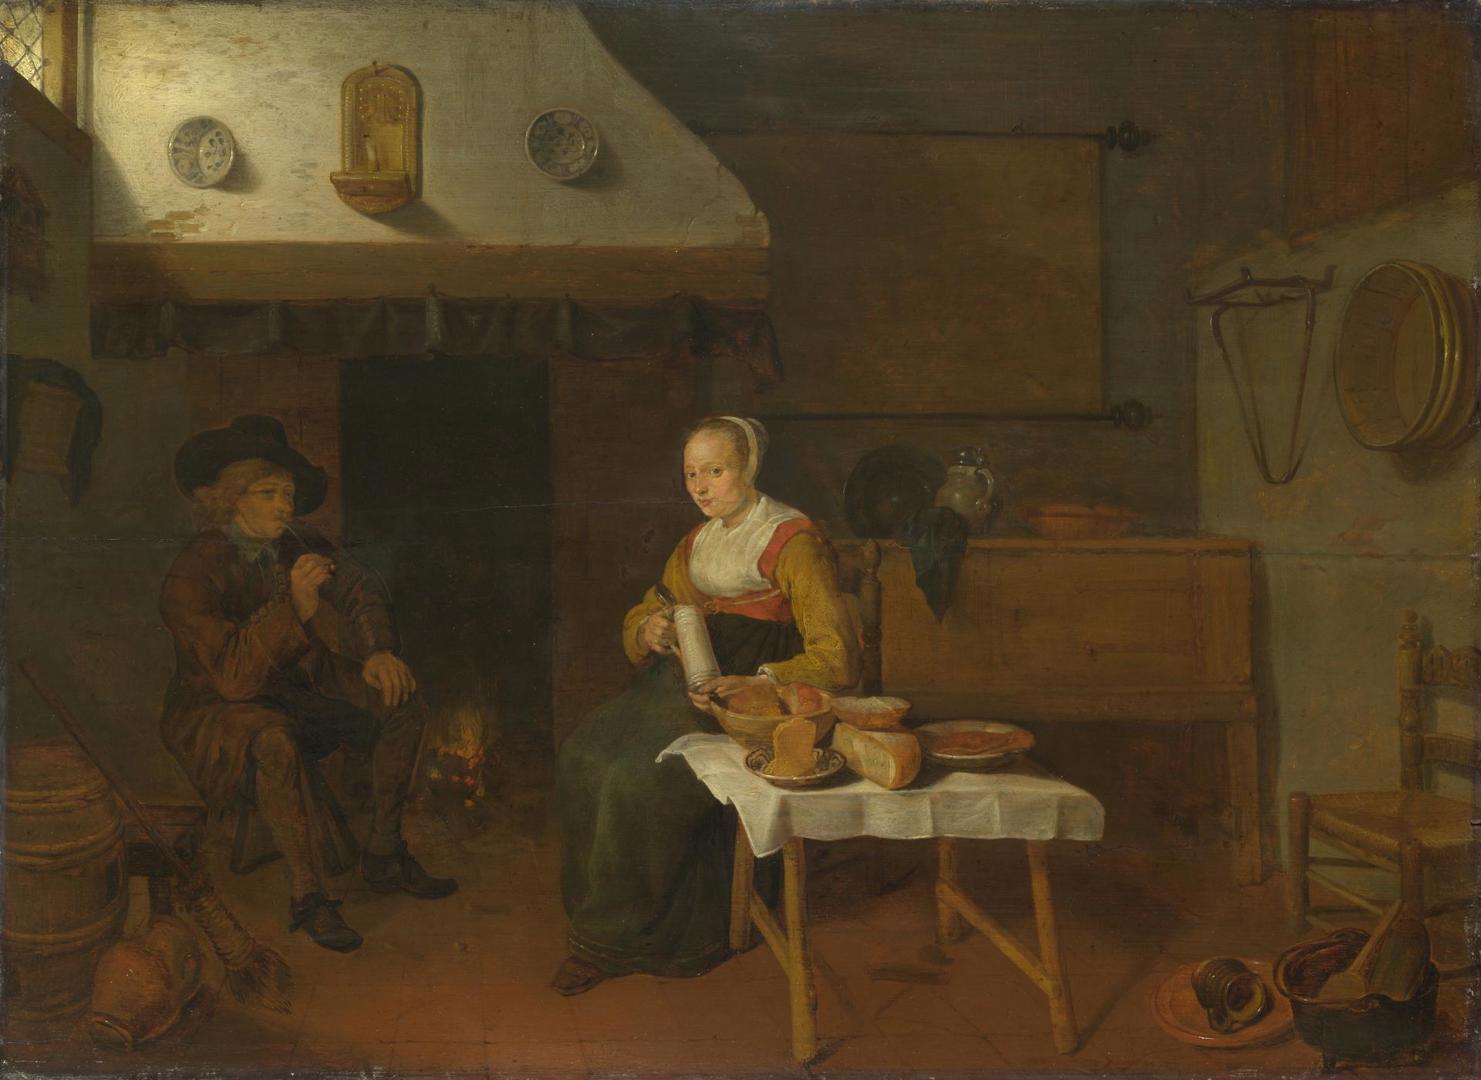 An Interior, with a Man and a Woman seated by a Fire by Quiringh van Brekelenkam